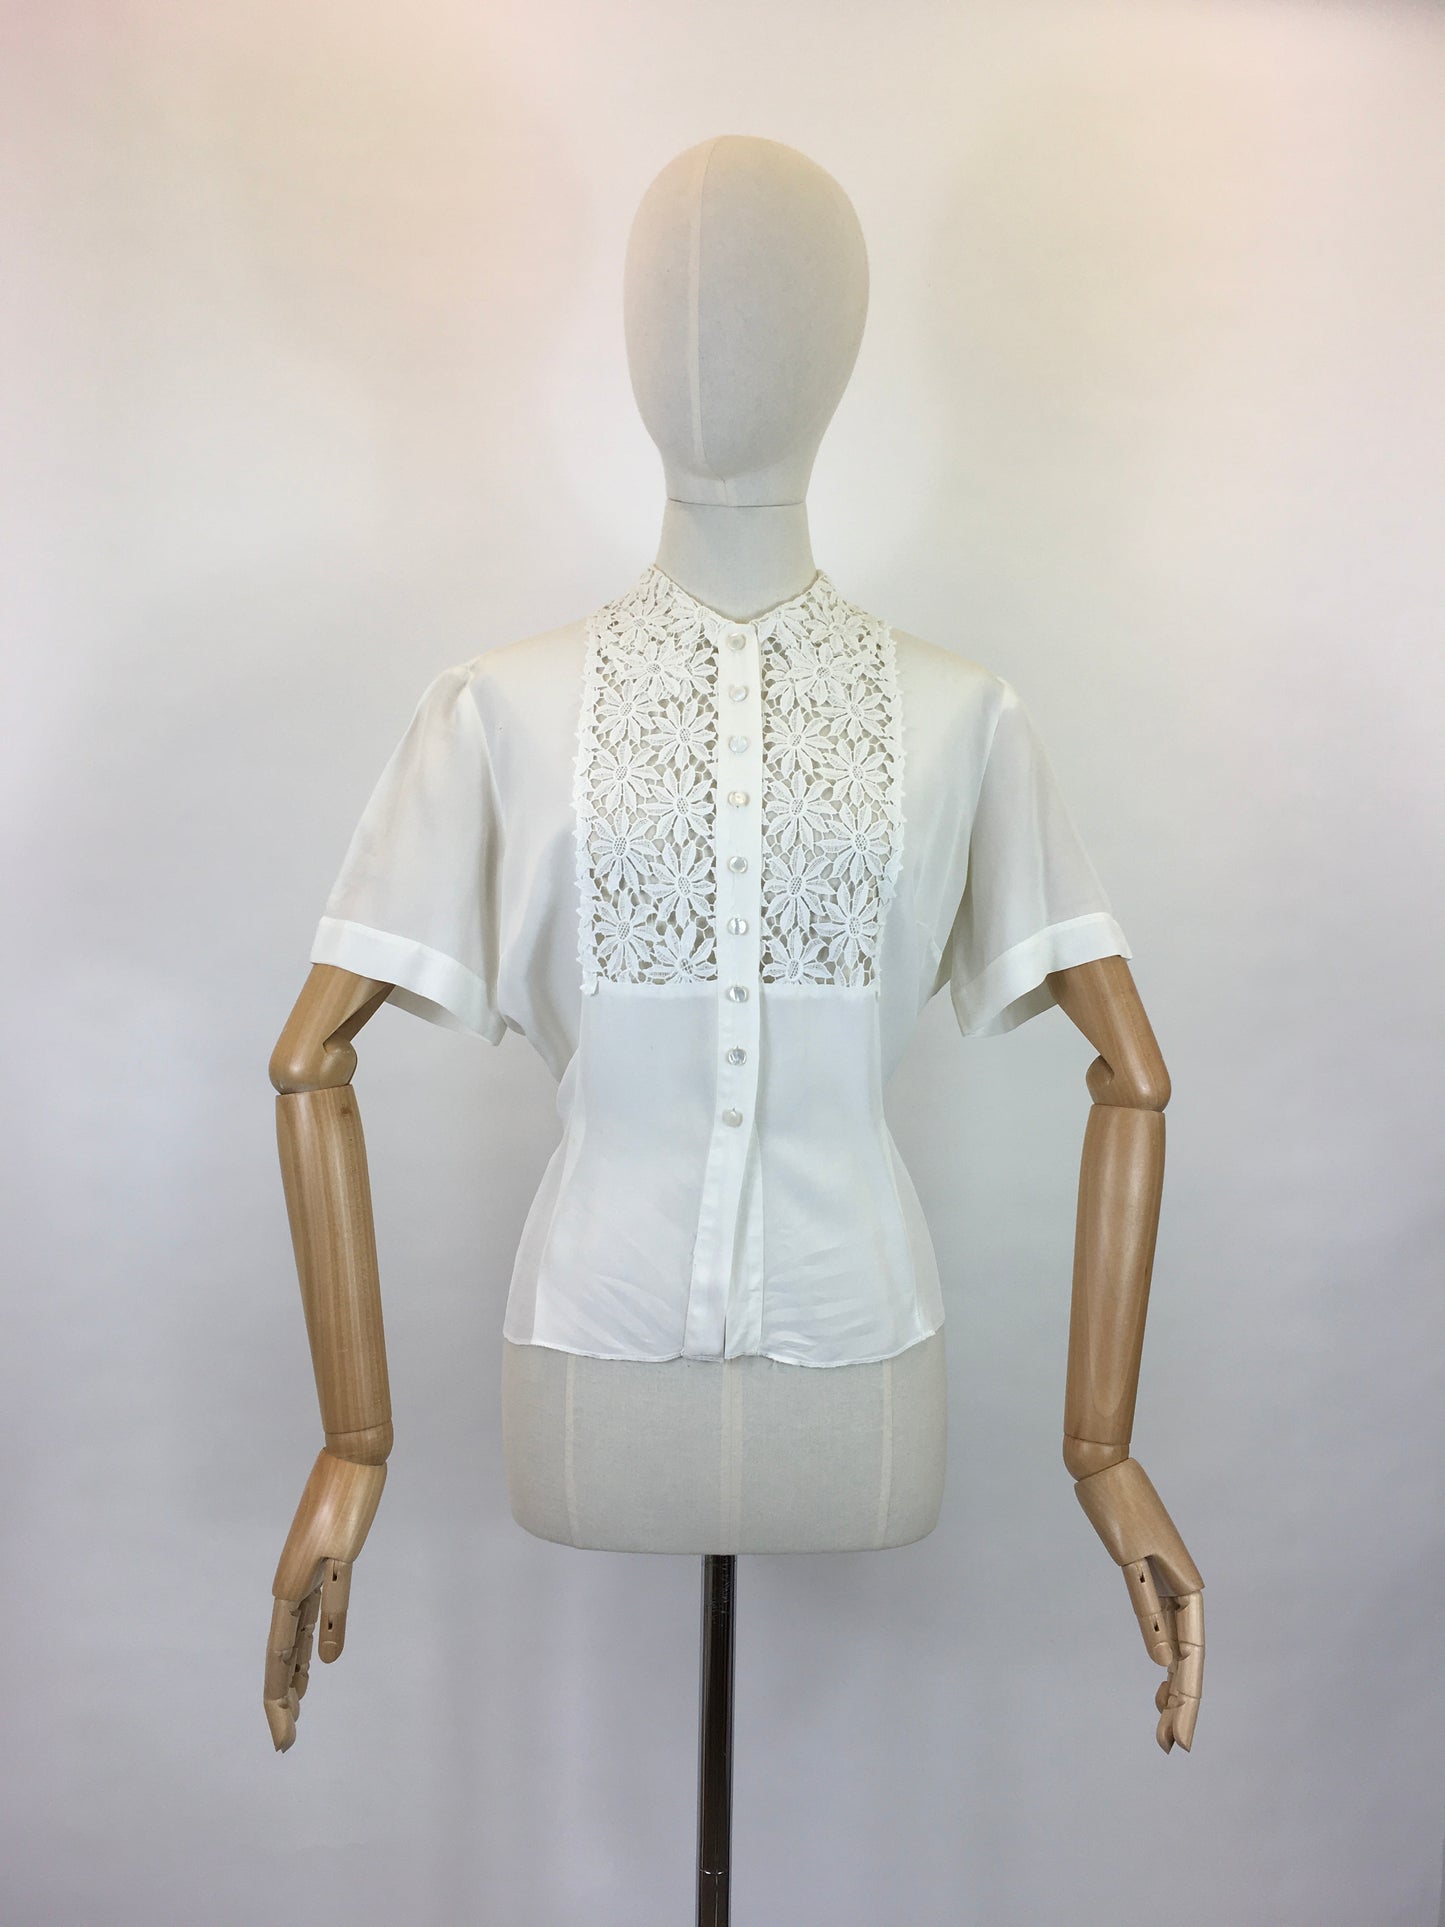 Original 1940’s ‘ Judy Bond’ White Blouse - With Stunning Floral Lace Detailing To The Bodice Panel